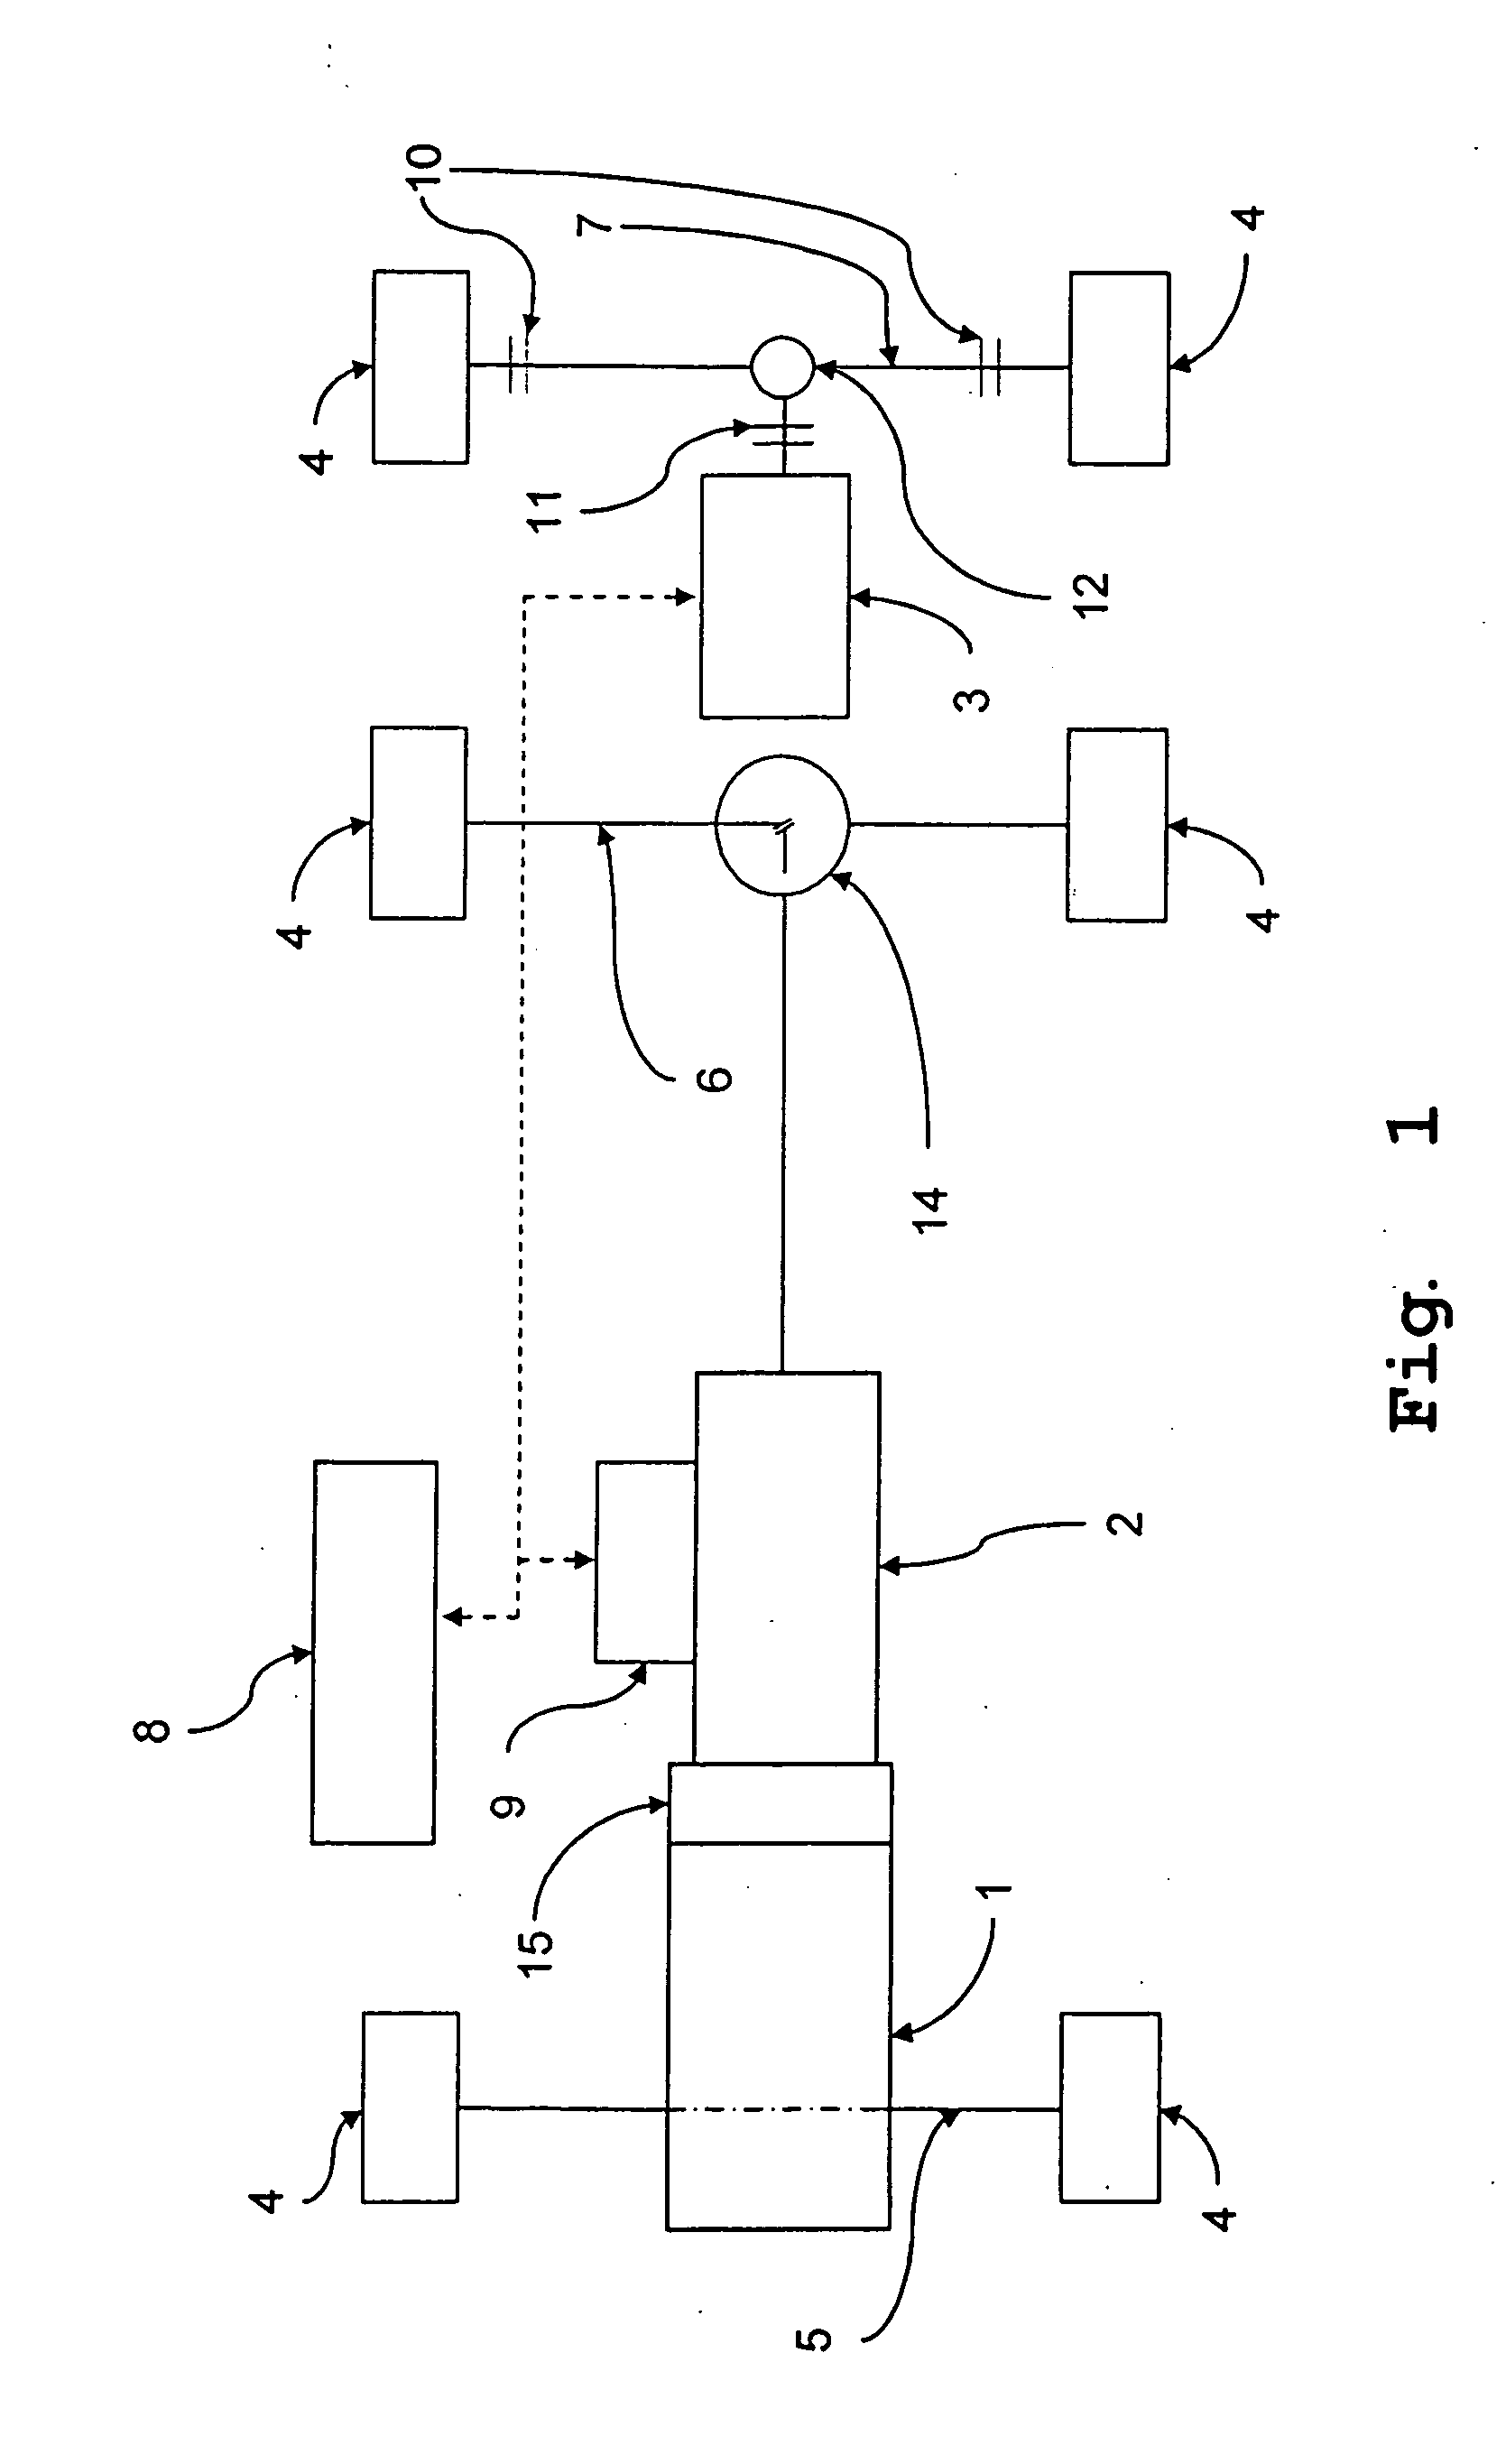 Drive train for a motor vehicle and method of operating a drive train of a motor vehicle